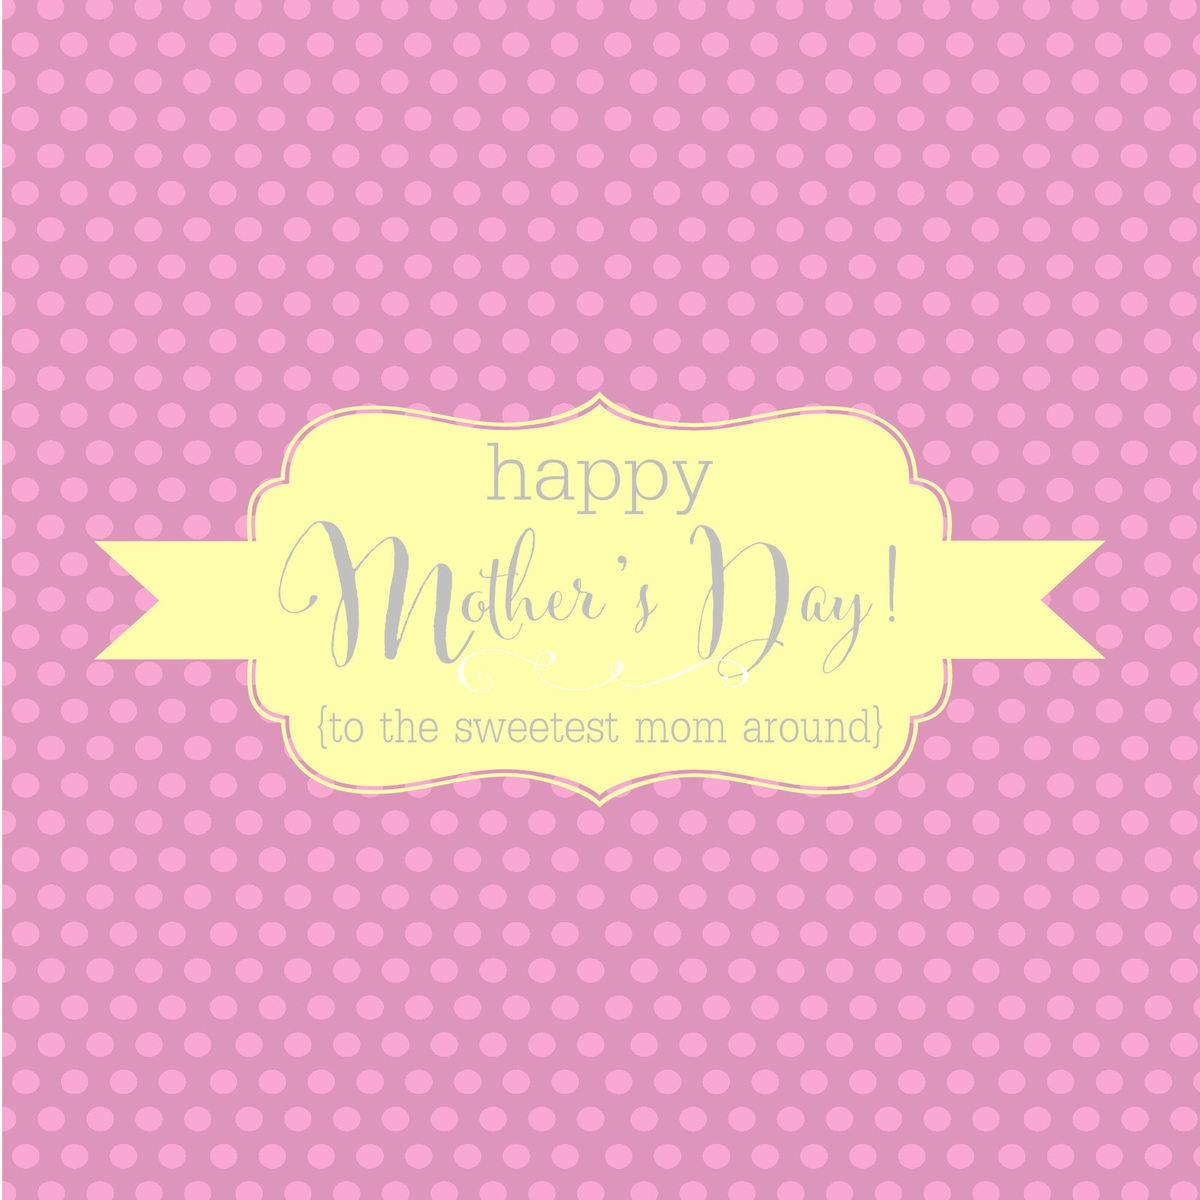 Mother s Day Candy Bar Wrappers Let s DIY It All With Kritsyn Merkley